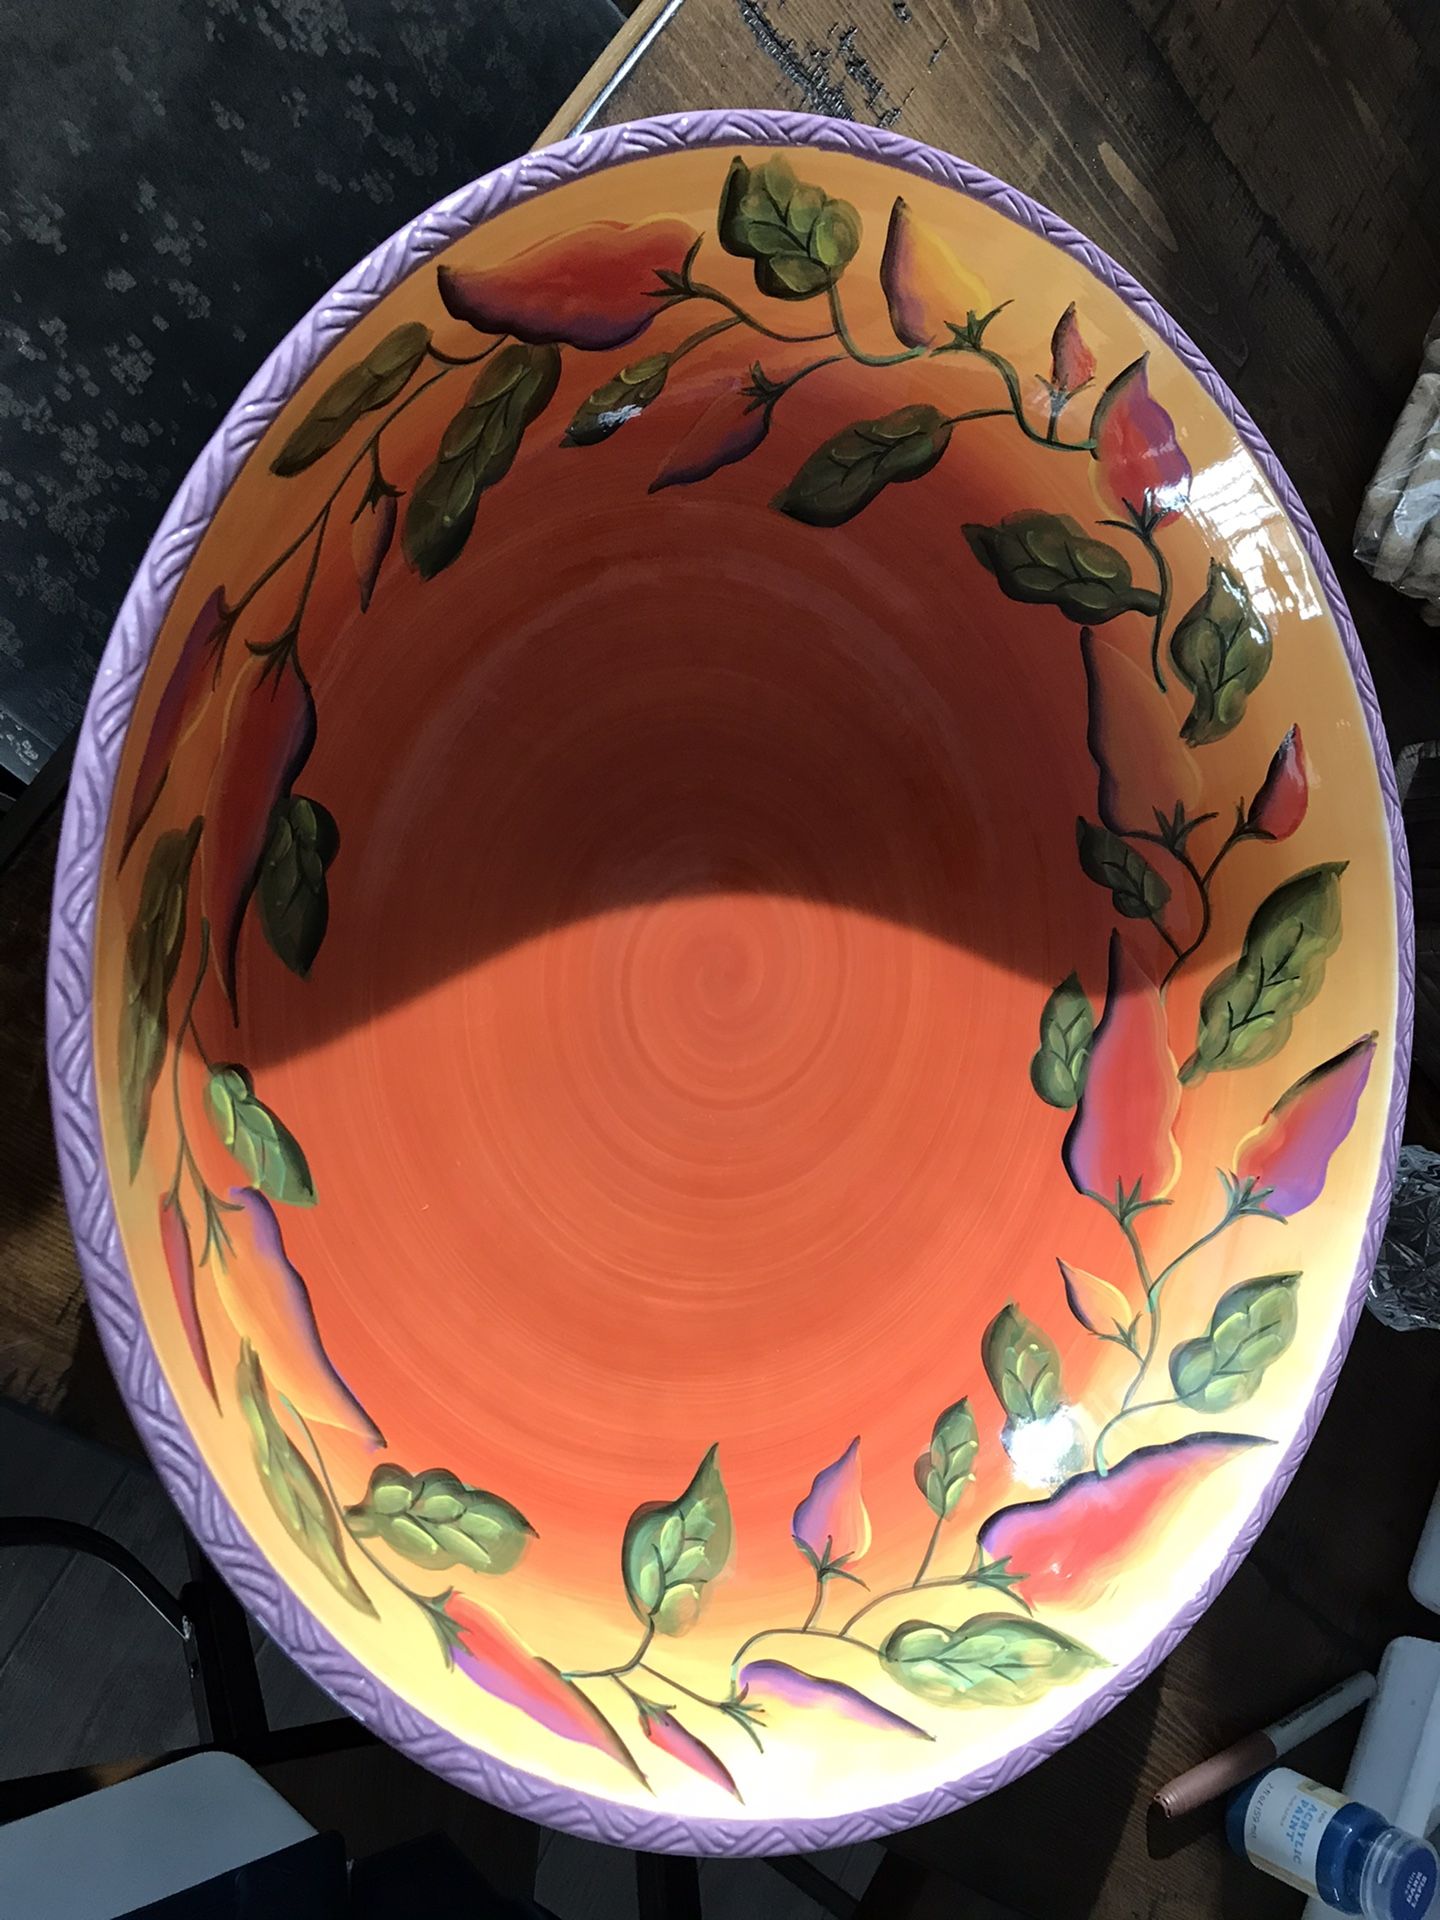 17” Party Bowl